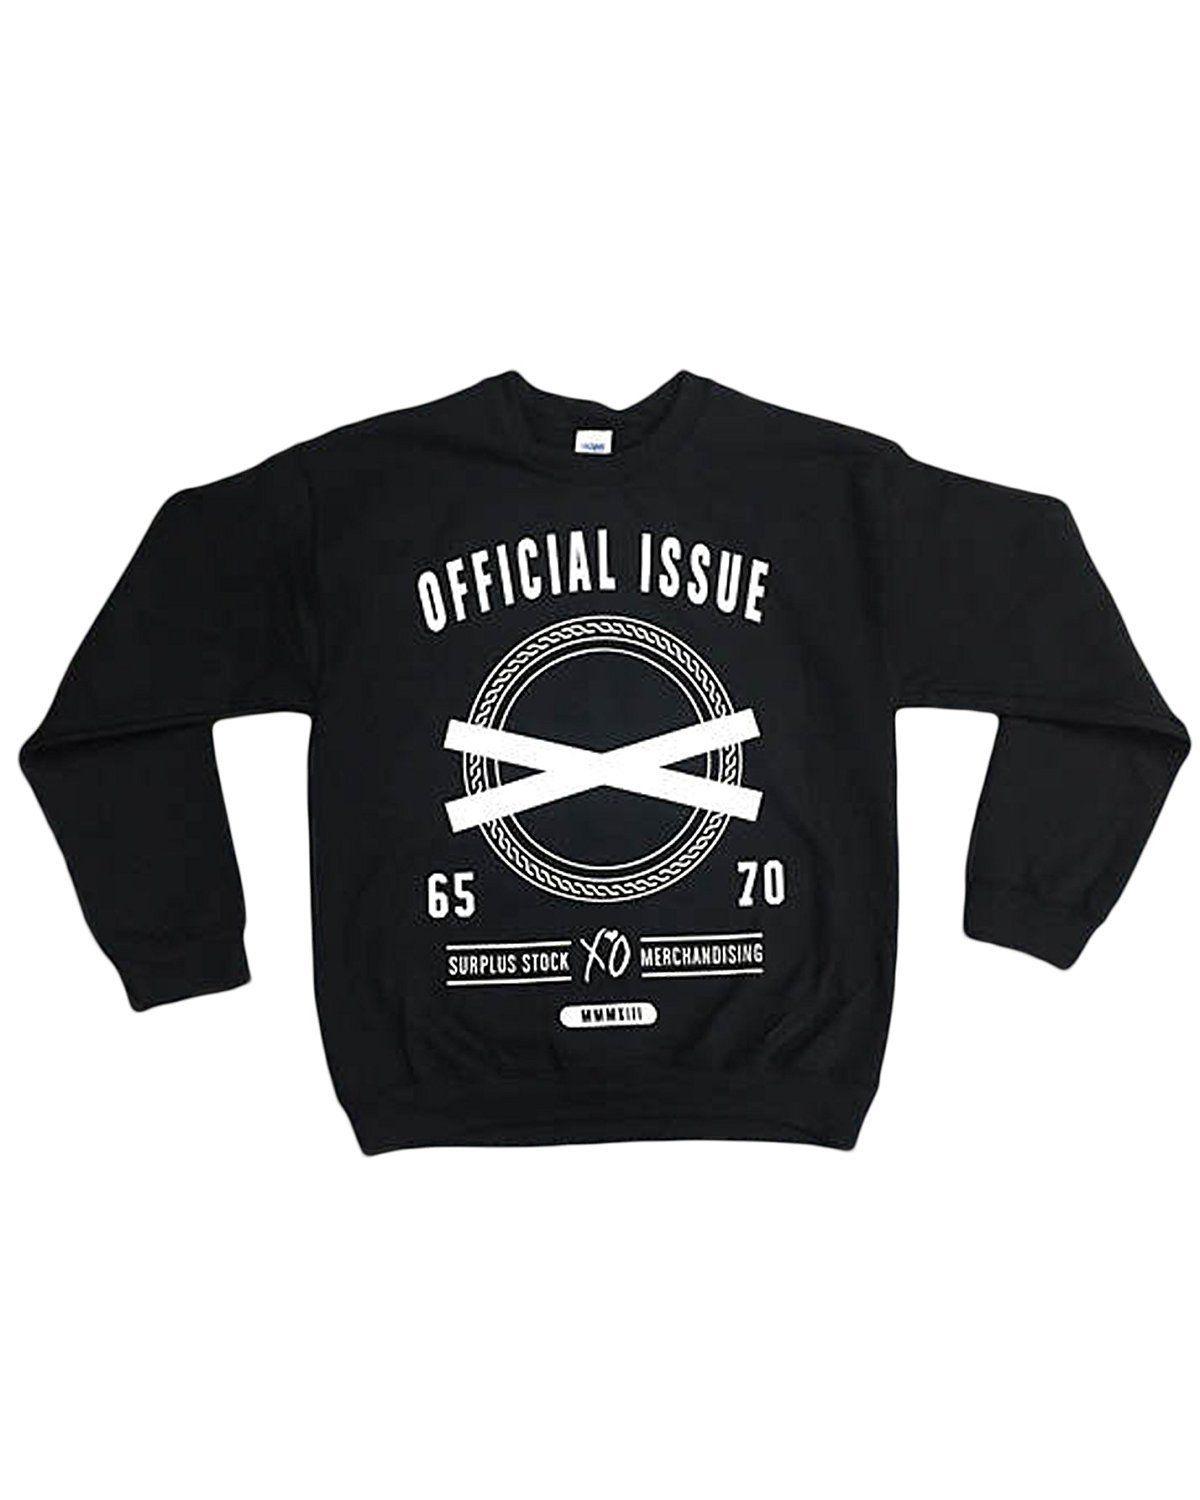 Official Issue Xo Logo - Official Issue XO Crew Neck 2017 (White Print)